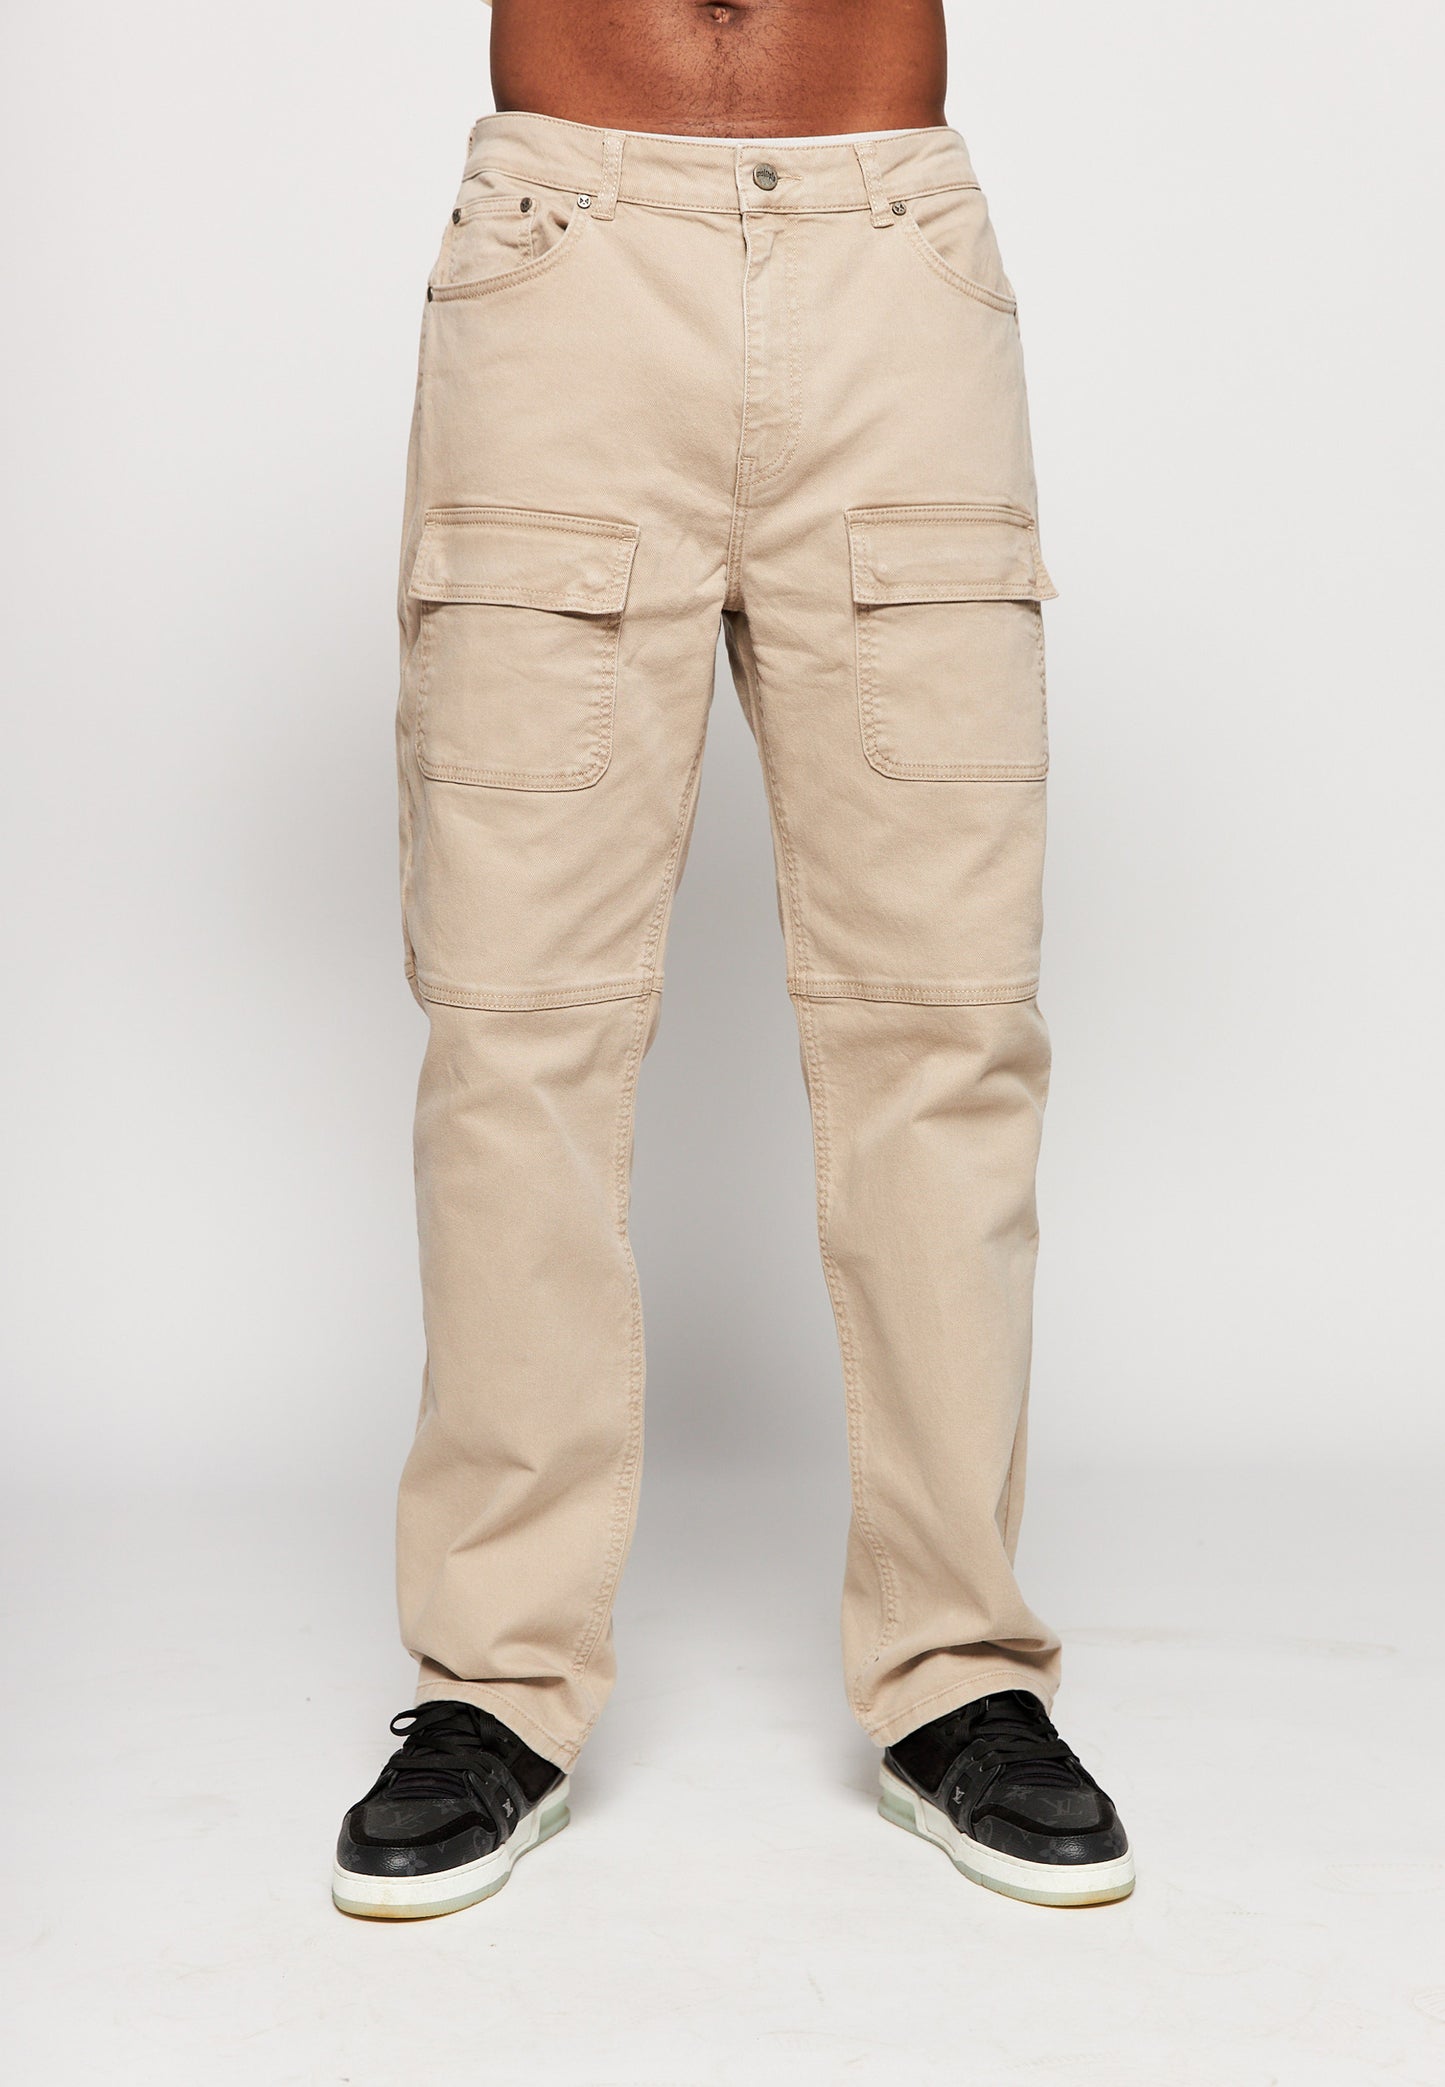 Multiply Denim FRONT POCKET Simply Taupe